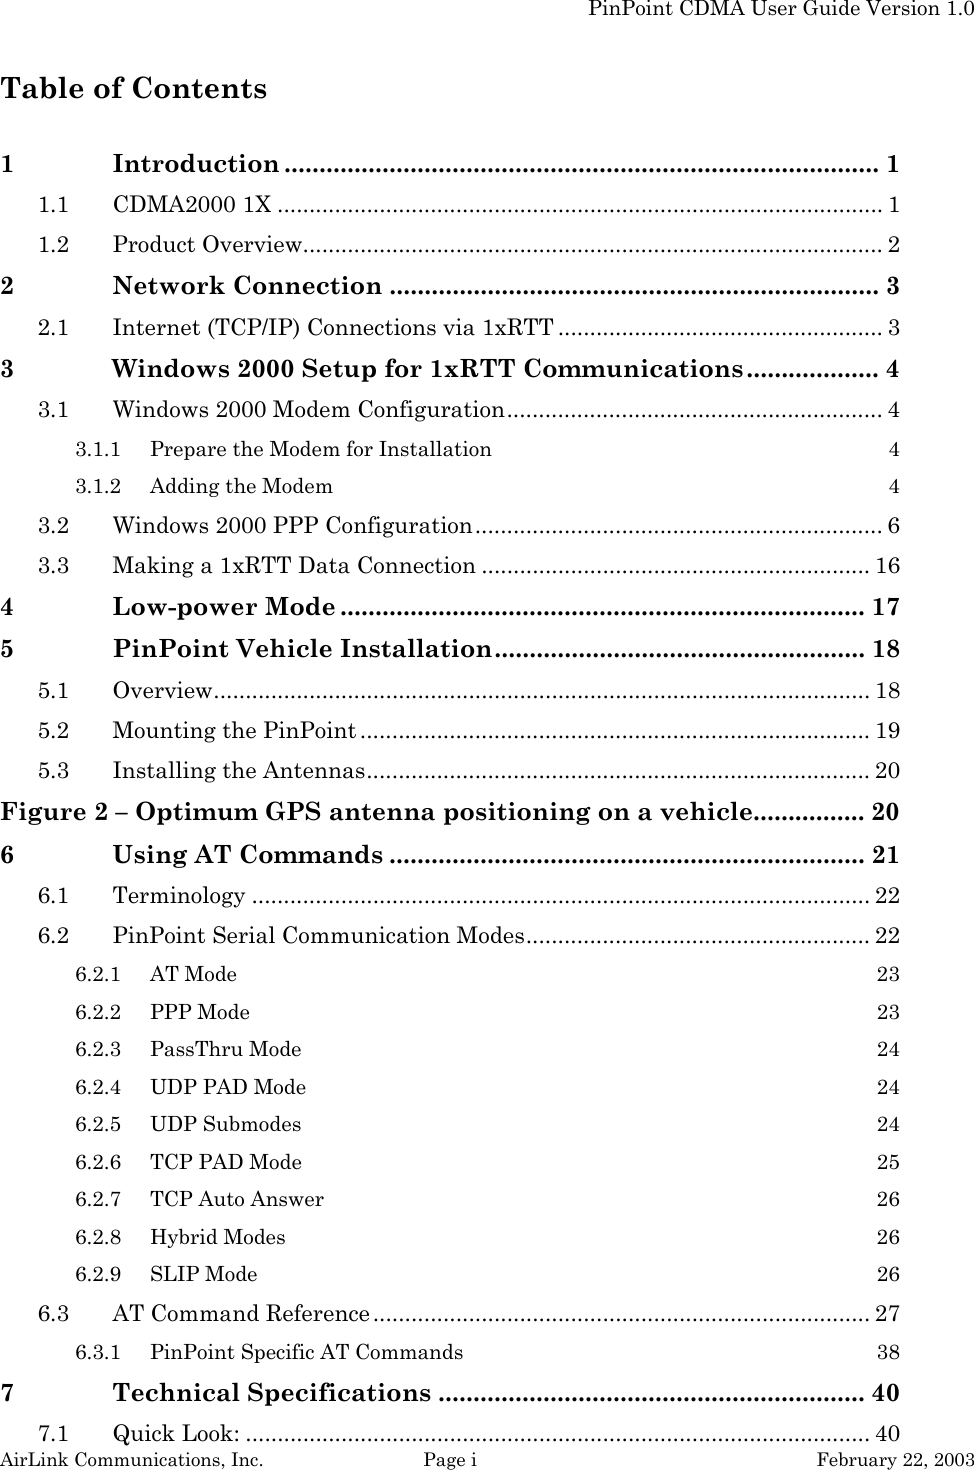   PinPoint CDMA User Guide Version 1.0 AirLink Communications, Inc.  Page i  February 22, 2003 Table of Contents  1 Introduction ..................................................................................... 1 1.1 CDMA2000 1X ............................................................................................... 1 1.2 Product Overview........................................................................................... 2 2 Network Connection ...................................................................... 3 2.1 Internet (TCP/IP) Connections via 1xRTT ................................................... 3 3 Windows 2000 Setup for 1xRTT Communications................... 4 3.1 Windows 2000 Modem Configuration........................................................... 4 3.1.1 Prepare the Modem for Installation  4 3.1.2 Adding the Modem  4 3.2 Windows 2000 PPP Configuration................................................................ 6 3.3 Making a 1xRTT Data Connection ............................................................. 16 4 Low-power Mode ........................................................................... 17 5 PinPoint Vehicle Installation..................................................... 18 5.1 Overview....................................................................................................... 18 5.2 Mounting the PinPoint ................................................................................ 19 5.3 Installing the Antennas............................................................................... 20 Figure 2 – Optimum GPS antenna positioning on a vehicle................ 20 6 Using AT Commands .................................................................... 21 6.1 Terminology ................................................................................................. 22 6.2 PinPoint Serial Communication Modes...................................................... 22 6.2.1 AT Mode  23 6.2.2 PPP Mode  23 6.2.3 PassThru Mode  24 6.2.4 UDP PAD Mode  24 6.2.5 UDP Submodes  24 6.2.6 TCP PAD Mode  25 6.2.7 TCP Auto Answer  26 6.2.8 Hybrid Modes  26 6.2.9 SLIP Mode  26 6.3 AT Command Reference .............................................................................. 27 6.3.1 PinPoint Specific AT Commands  38 7 Technical Specifications ............................................................. 40 7.1 Quick Look: .................................................................................................. 40 